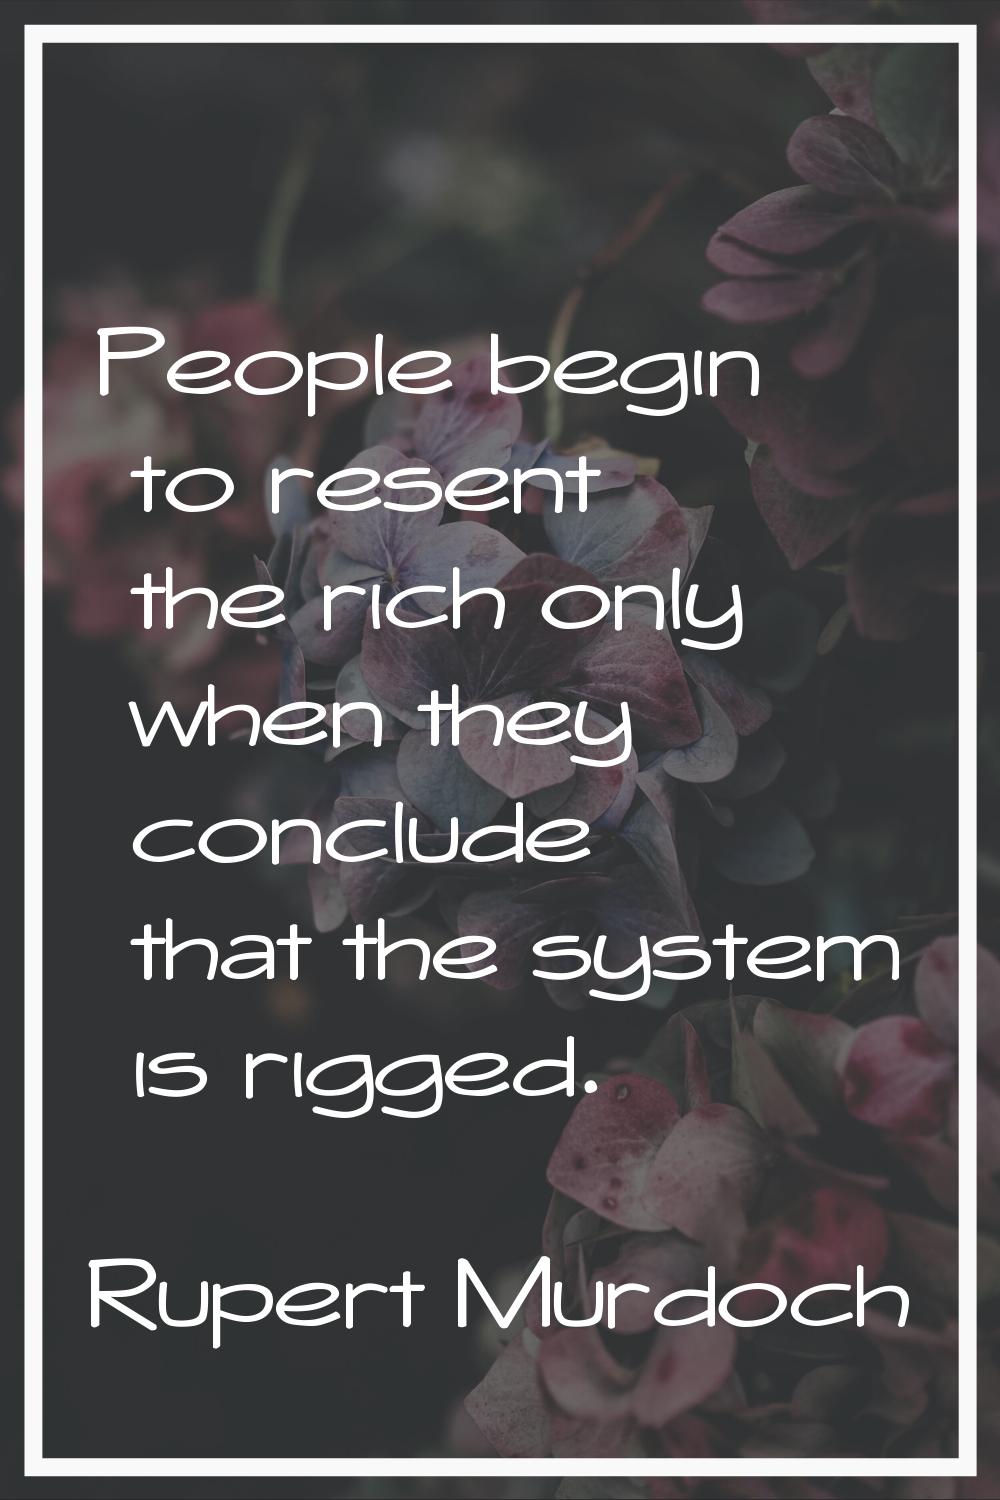 People begin to resent the rich only when they conclude that the system is rigged.